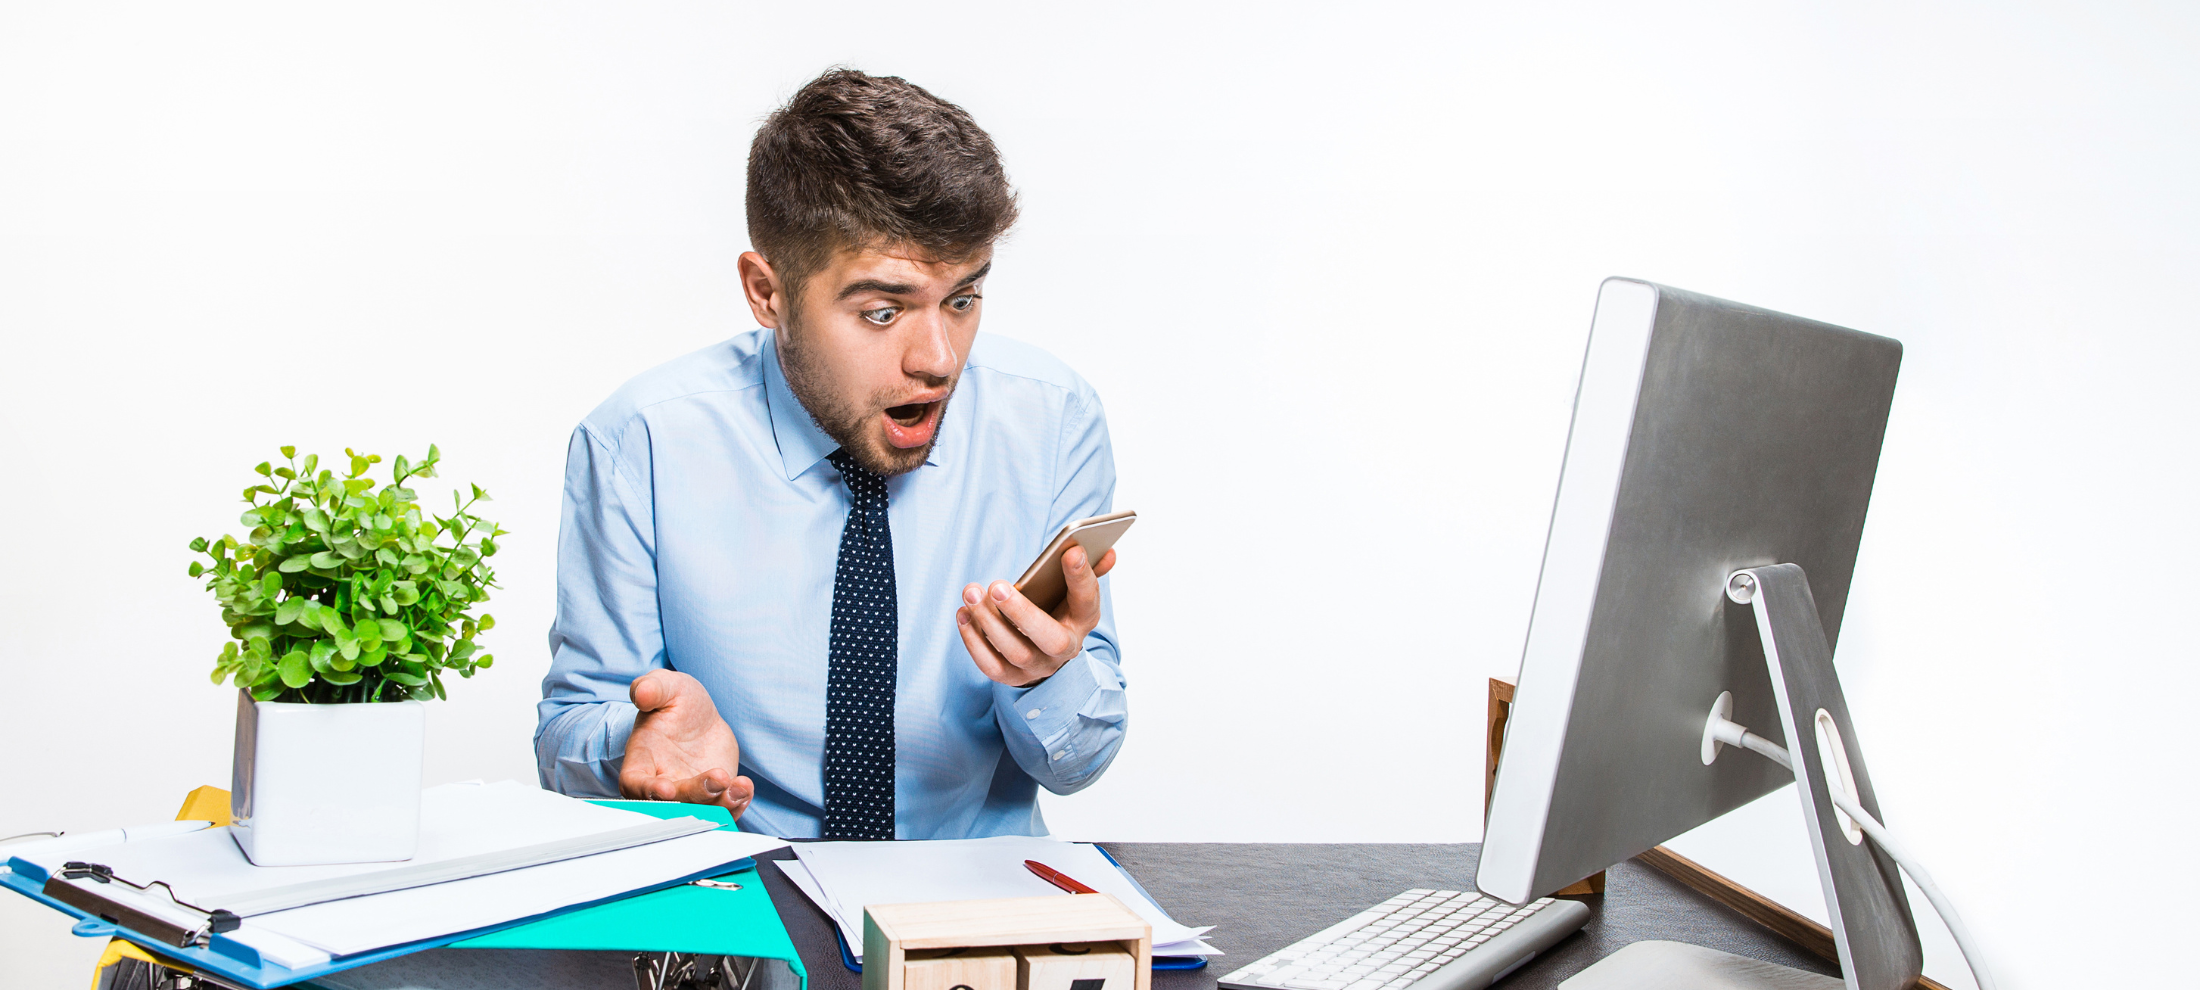 An HR manager shocked by what is a bad employee turnover rate